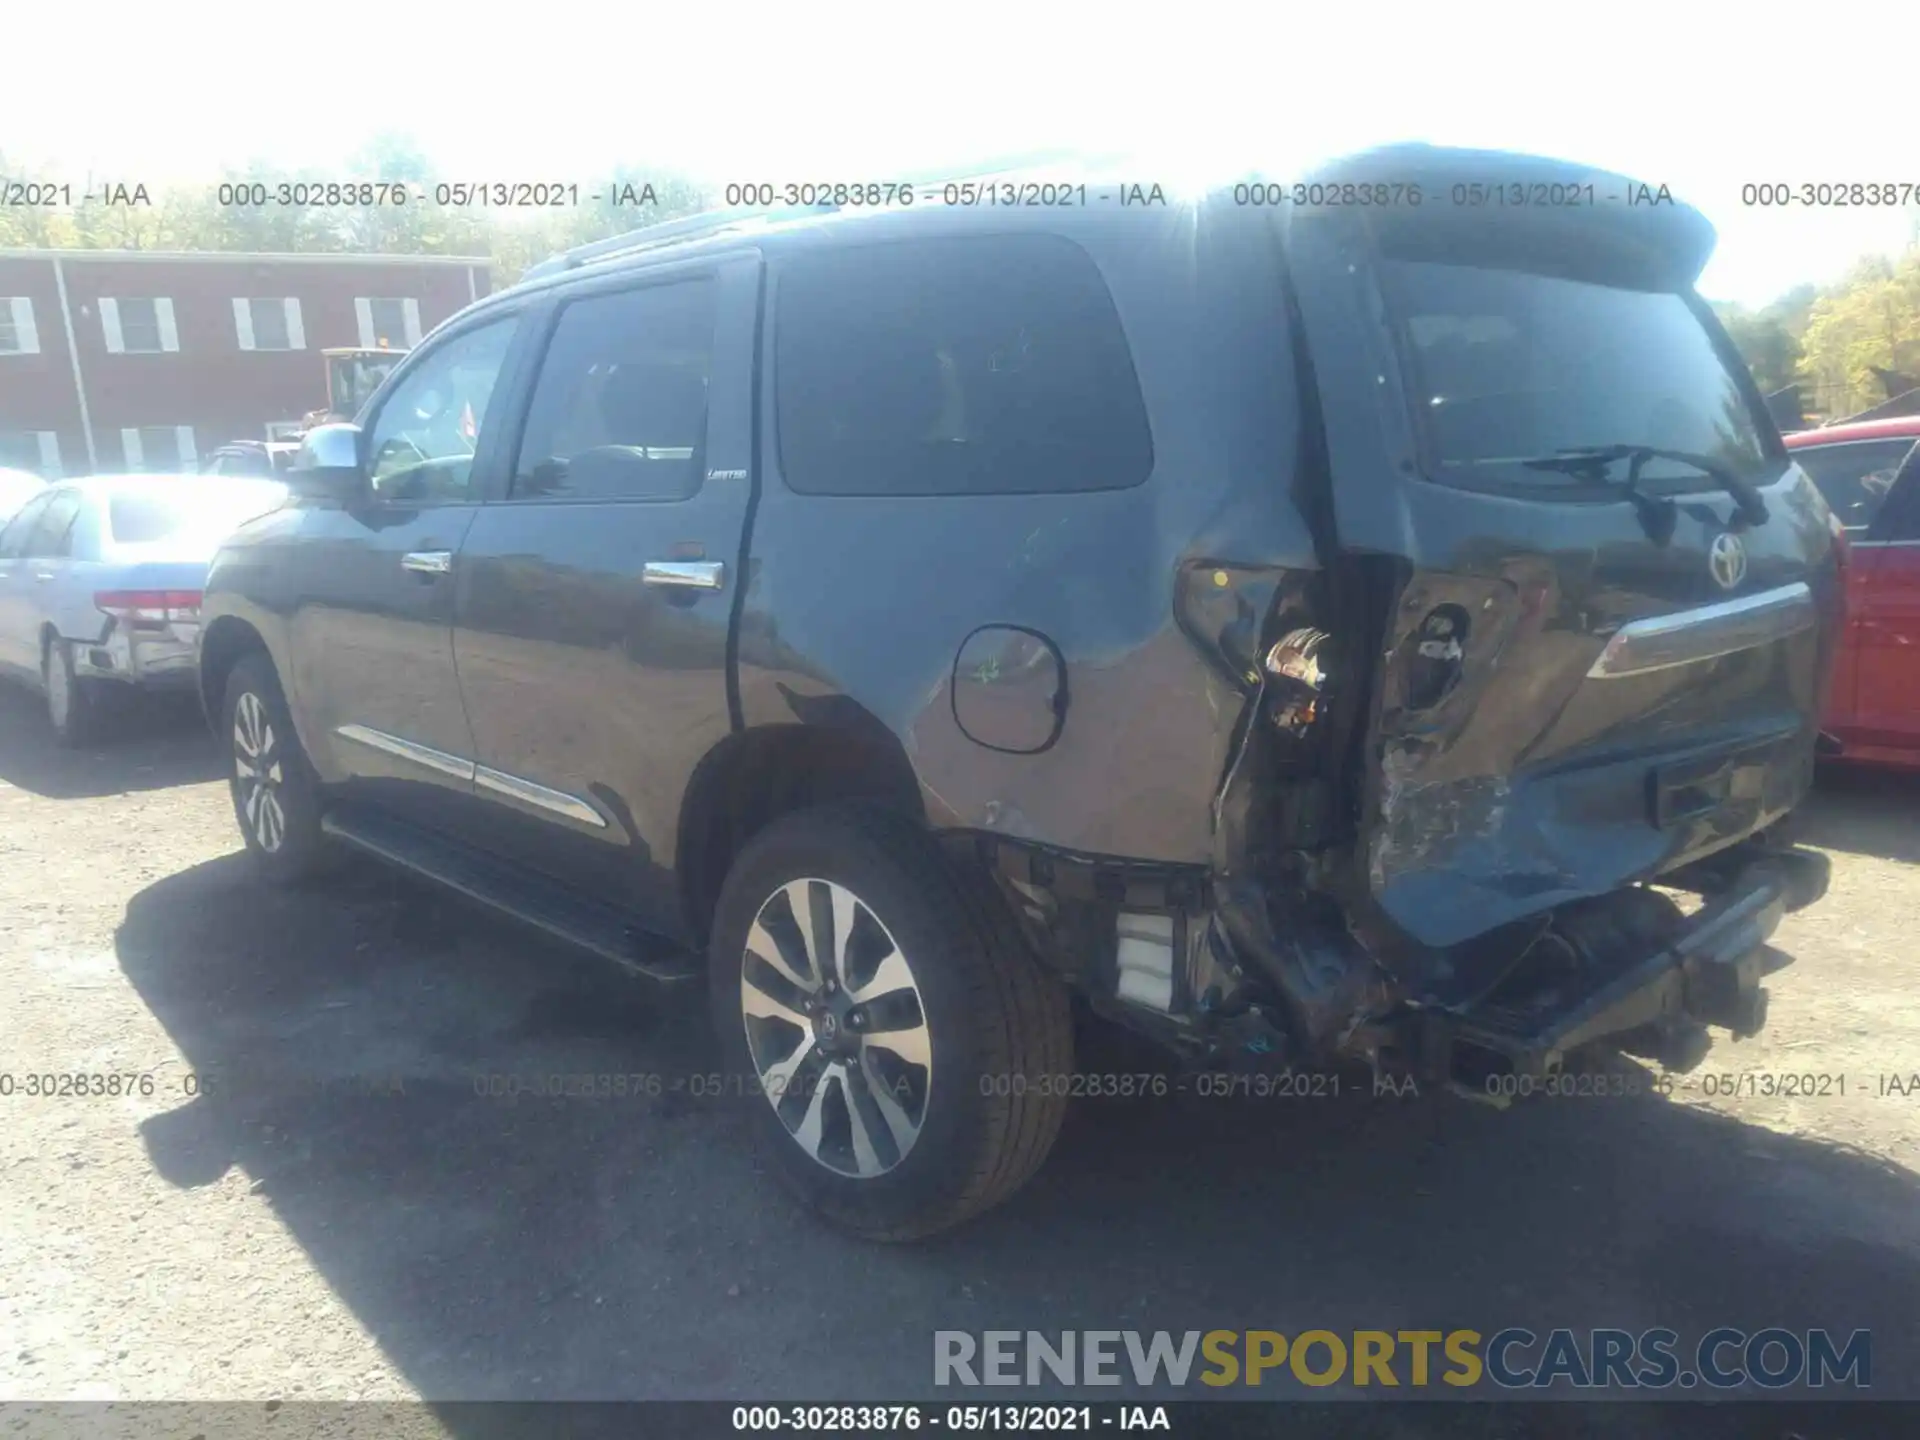 3 Photograph of a damaged car 5TDJY5G10KS171114 TOYOTA SEQUOIA 2019